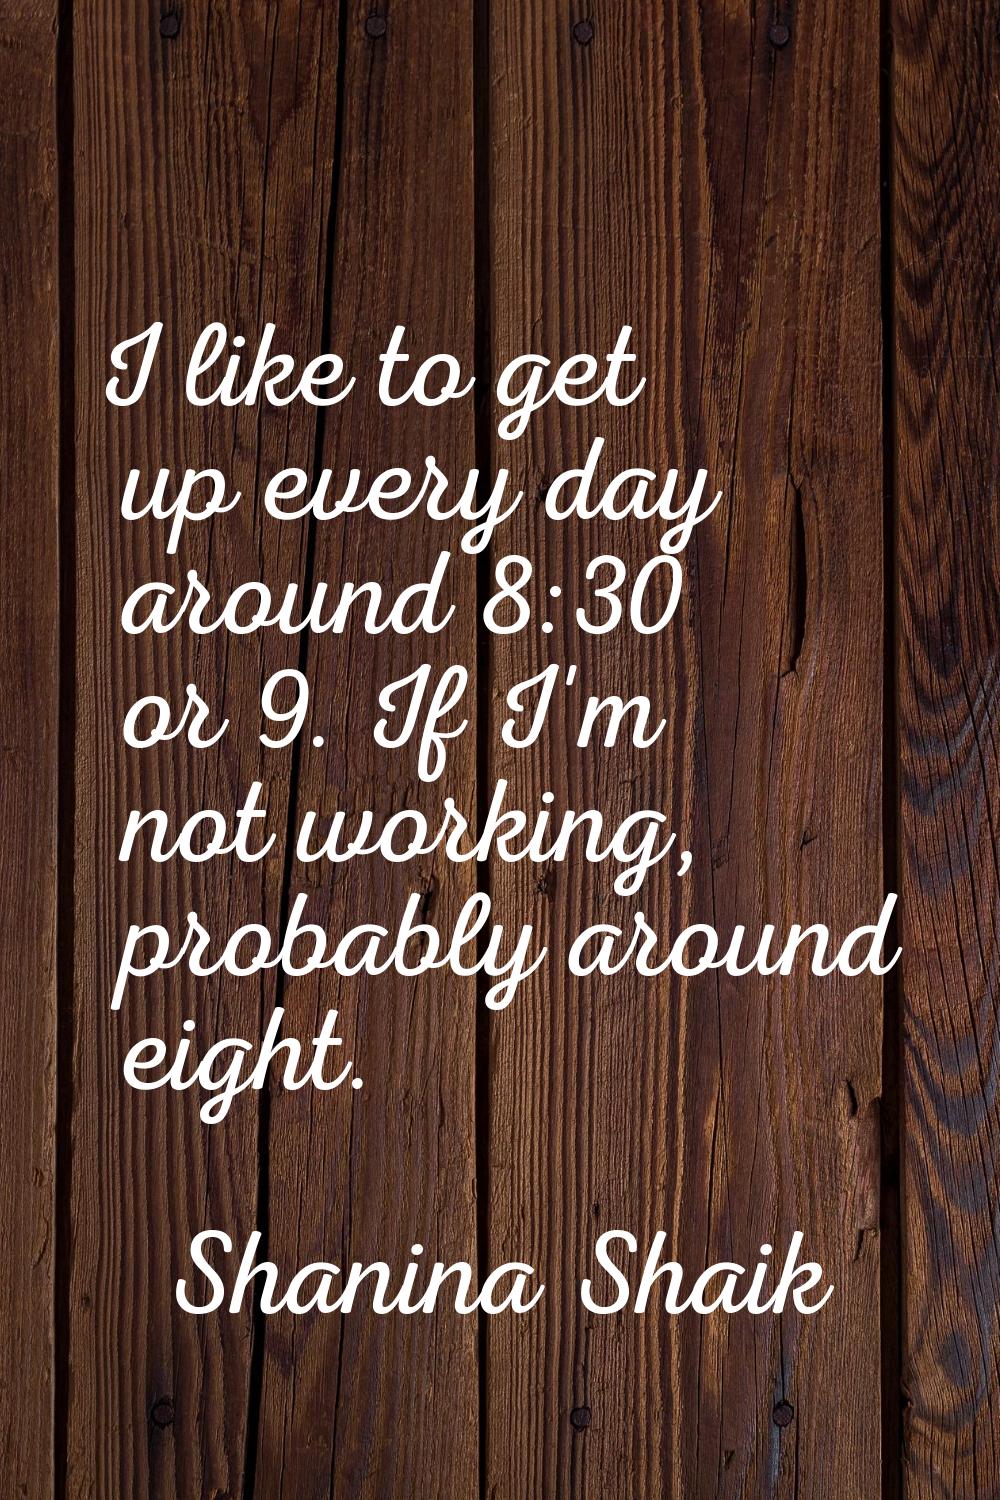 I like to get up every day around 8:30 or 9. If I'm not working, probably around eight.